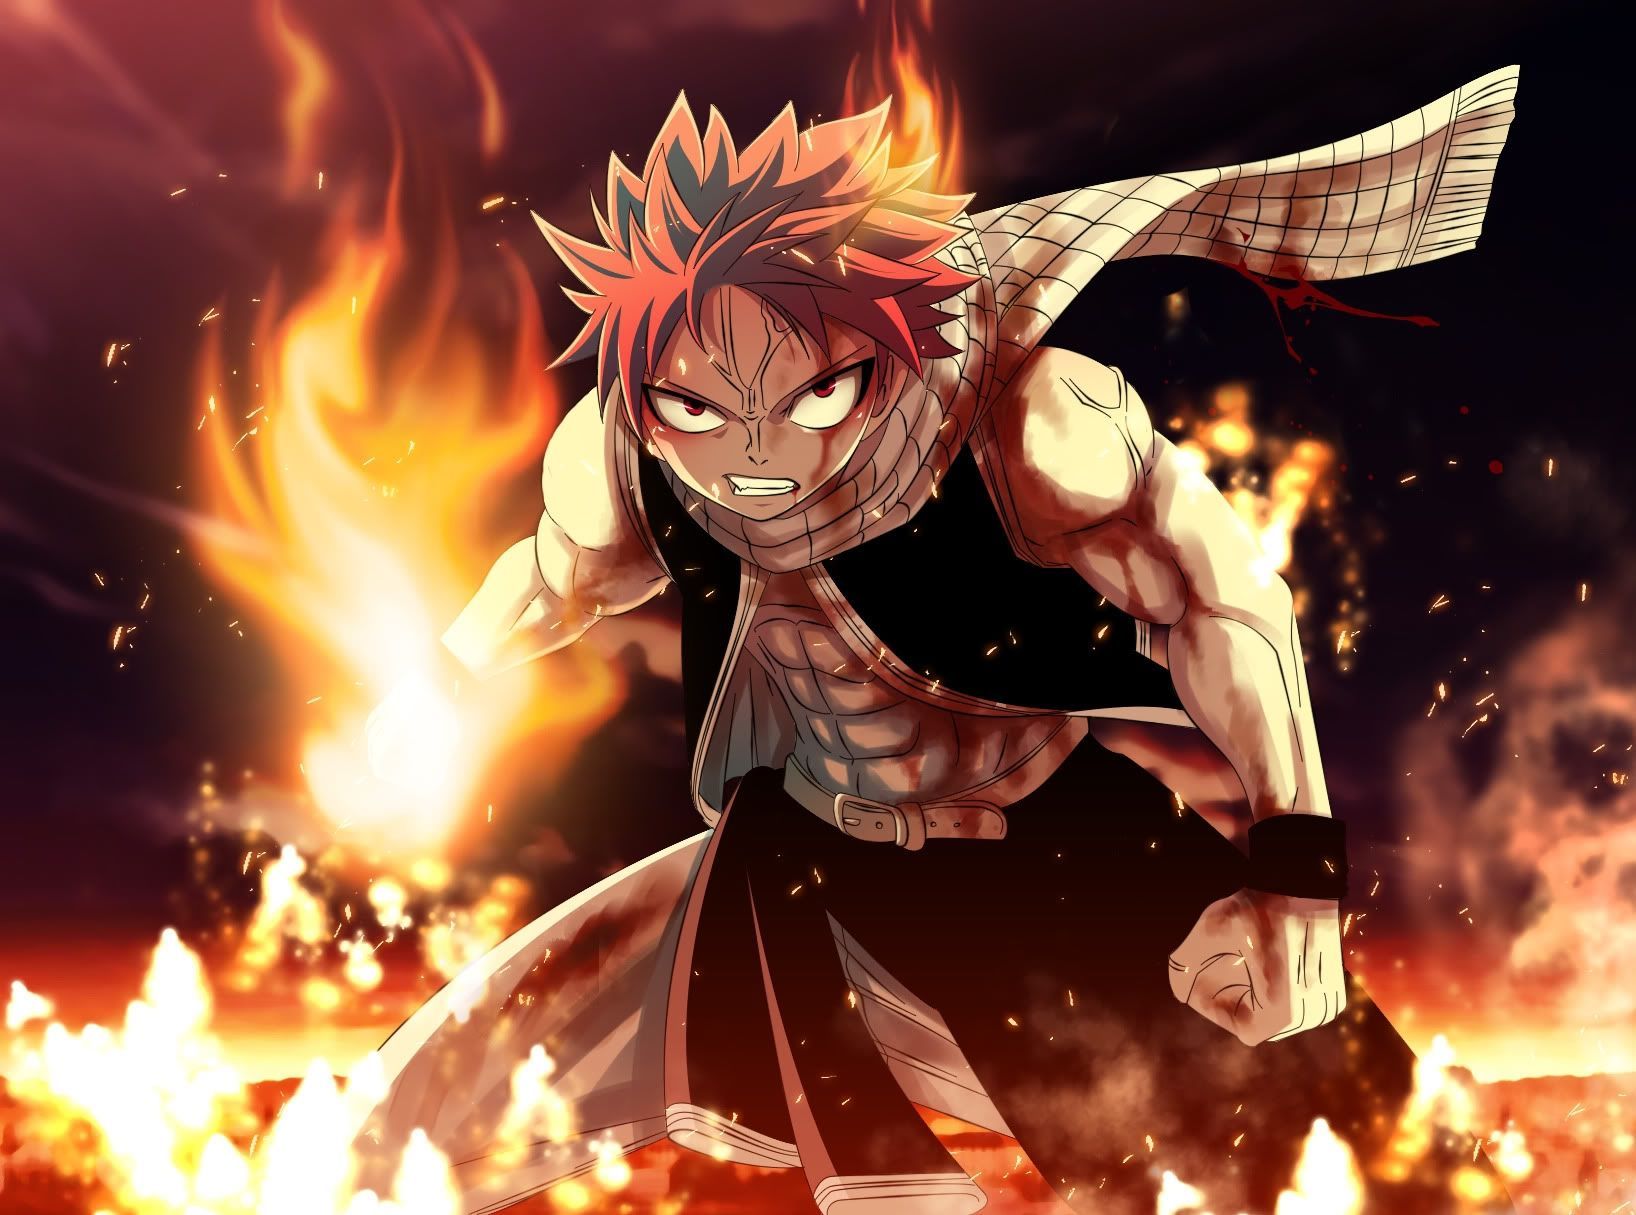 10 Fairy Tail Wallpapers HD for PC or Mobile - Anime Blog